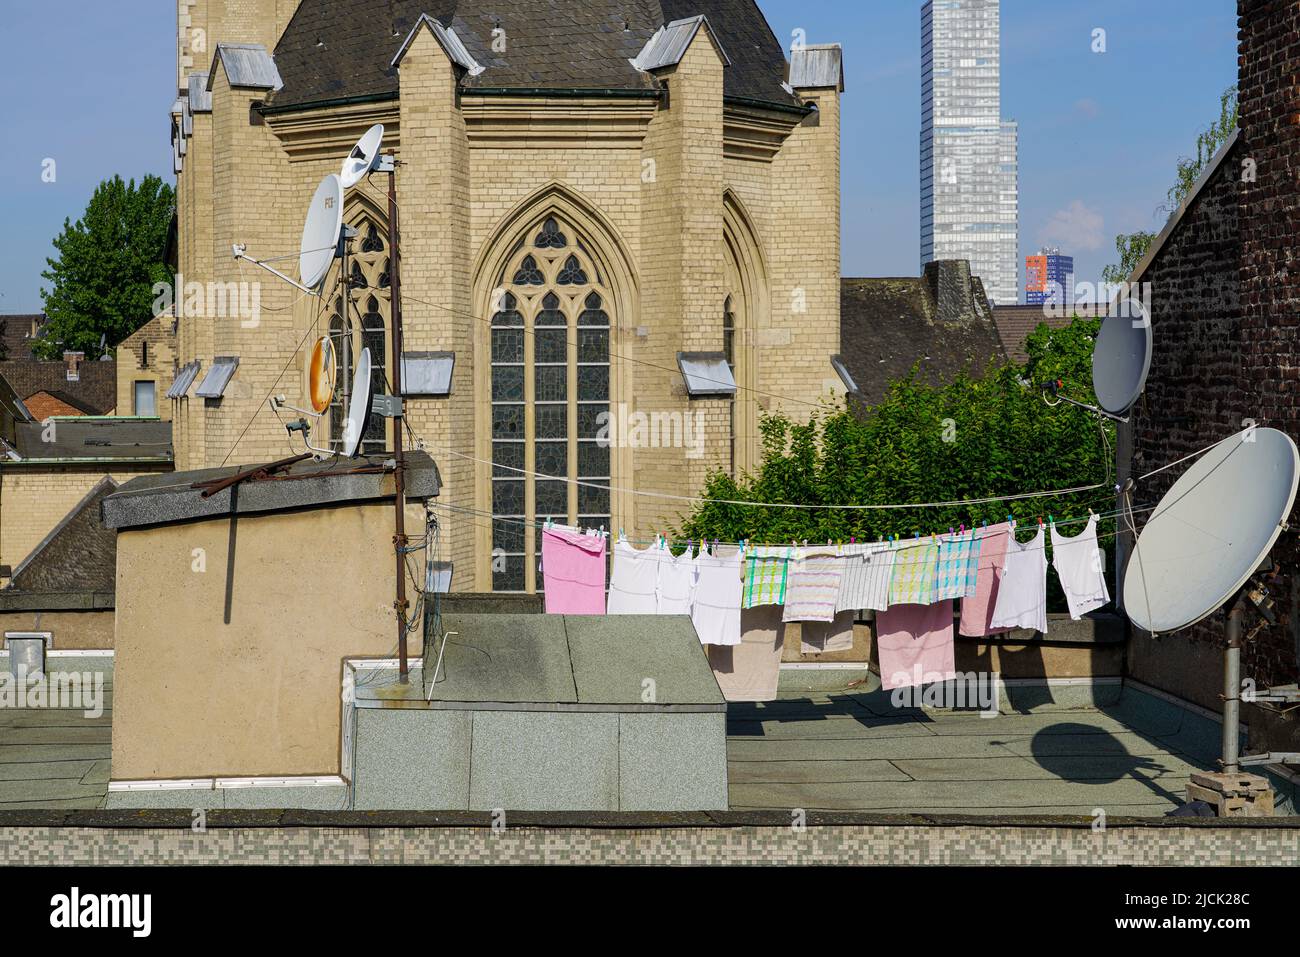 On the roof of an old building in Cologne, residents hang laundry to dry. Cologne, North Rhine-Westphalia, Germany, 22.5.22 Stock Photo